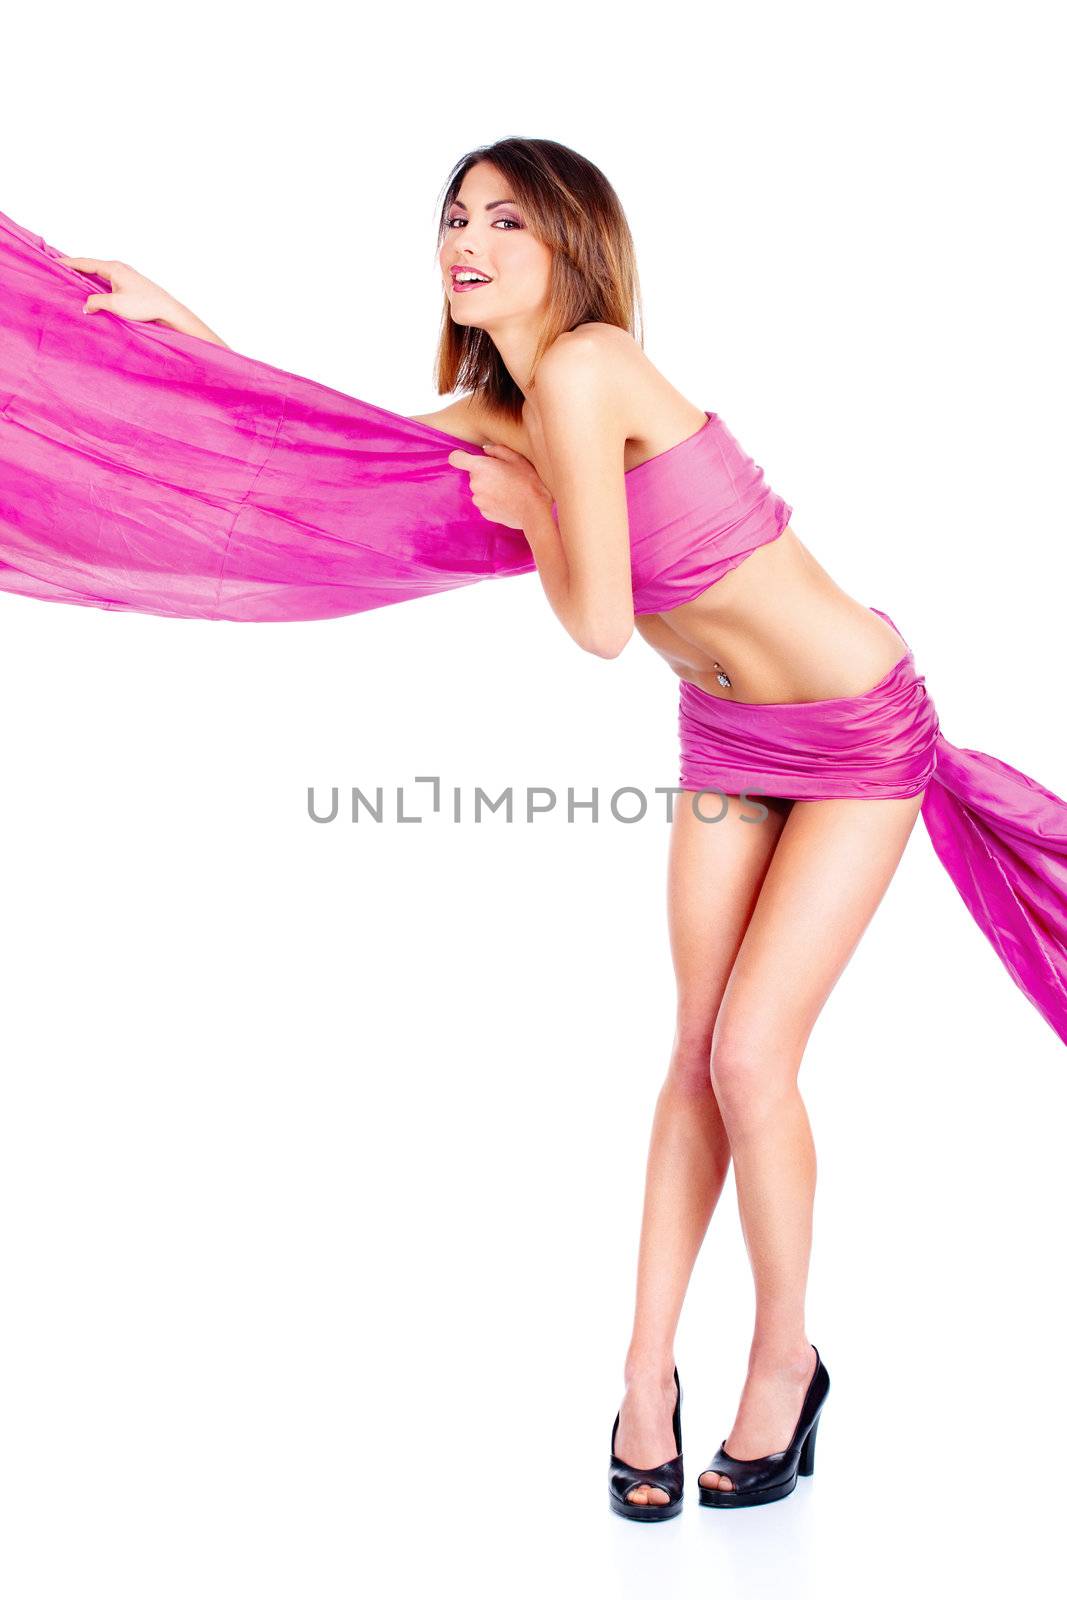 Young woman covered with pink material, isolate on white background